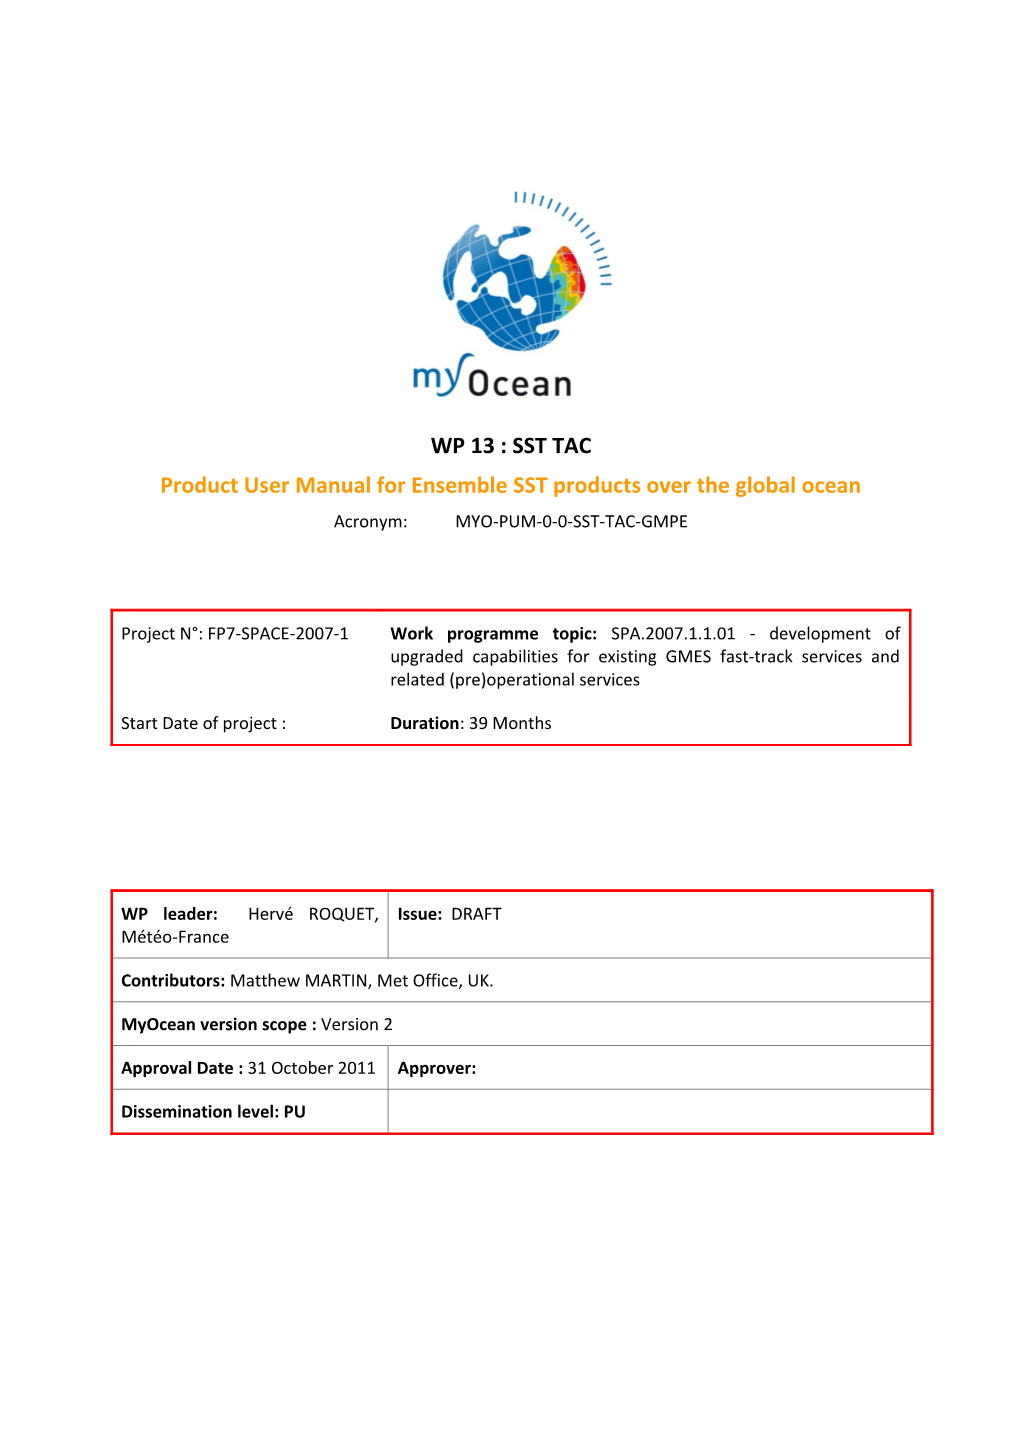 Product User Manual for Ensemble SST Products Over the Global Ocean